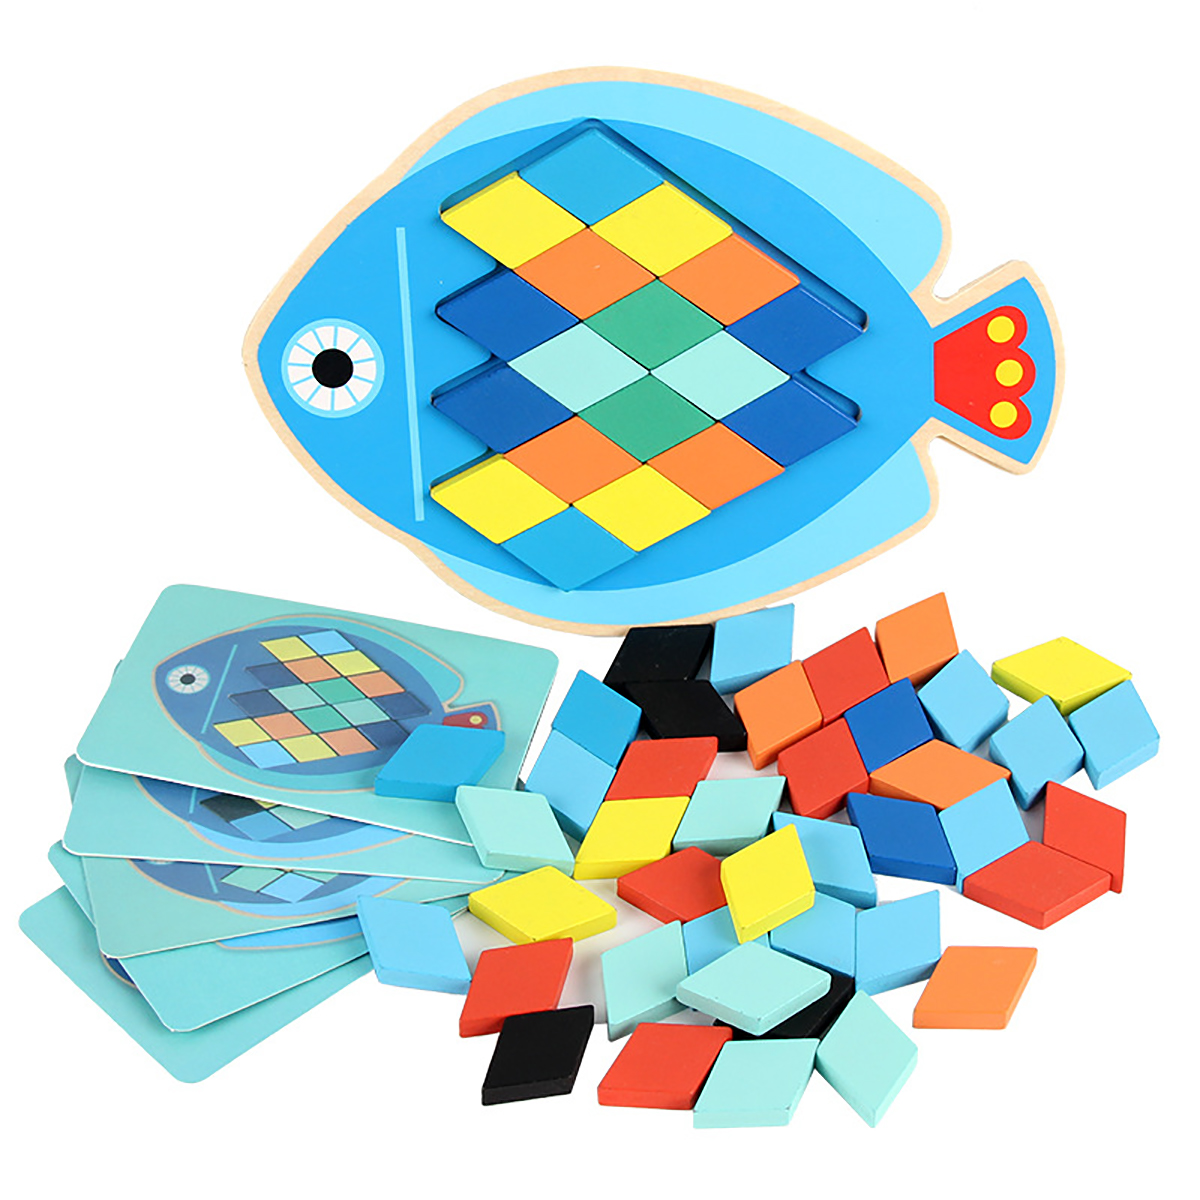 Wood-DIY-Assembly-Jigsaw-Puzzle-Toy-Colors-Shapes-Cartoon-Fish-Owl-Matching-Cards-Toy-for-Children-L-1682195-5